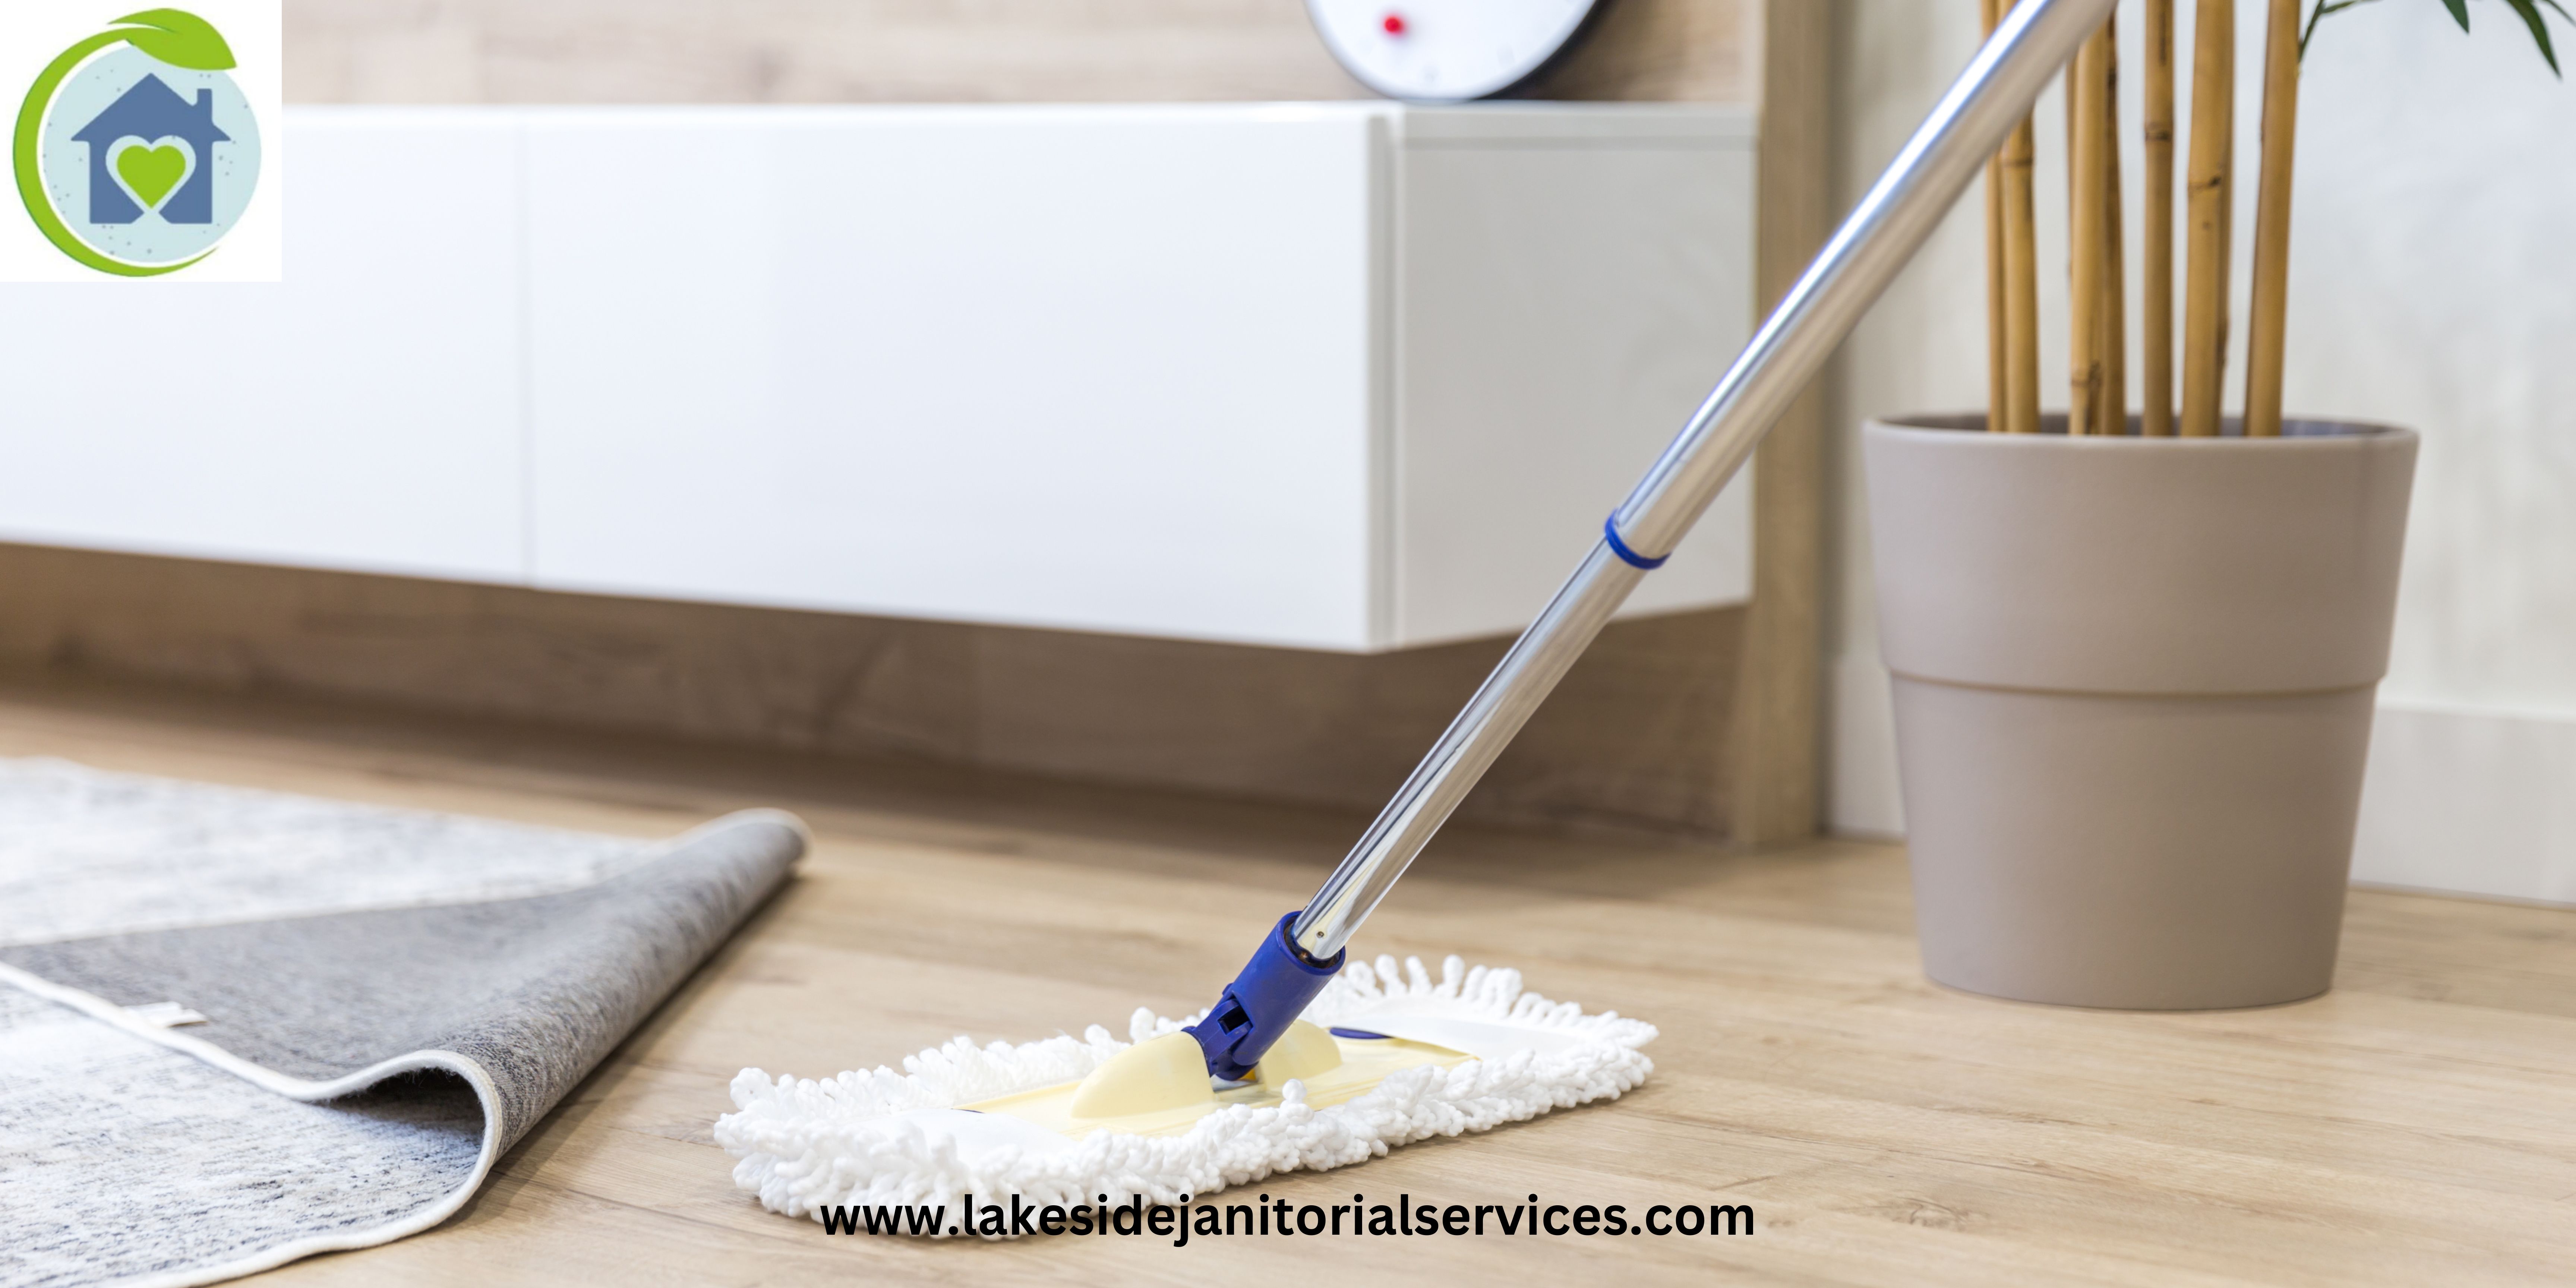 Lakeside Janitorial Services Ltd Cover Image